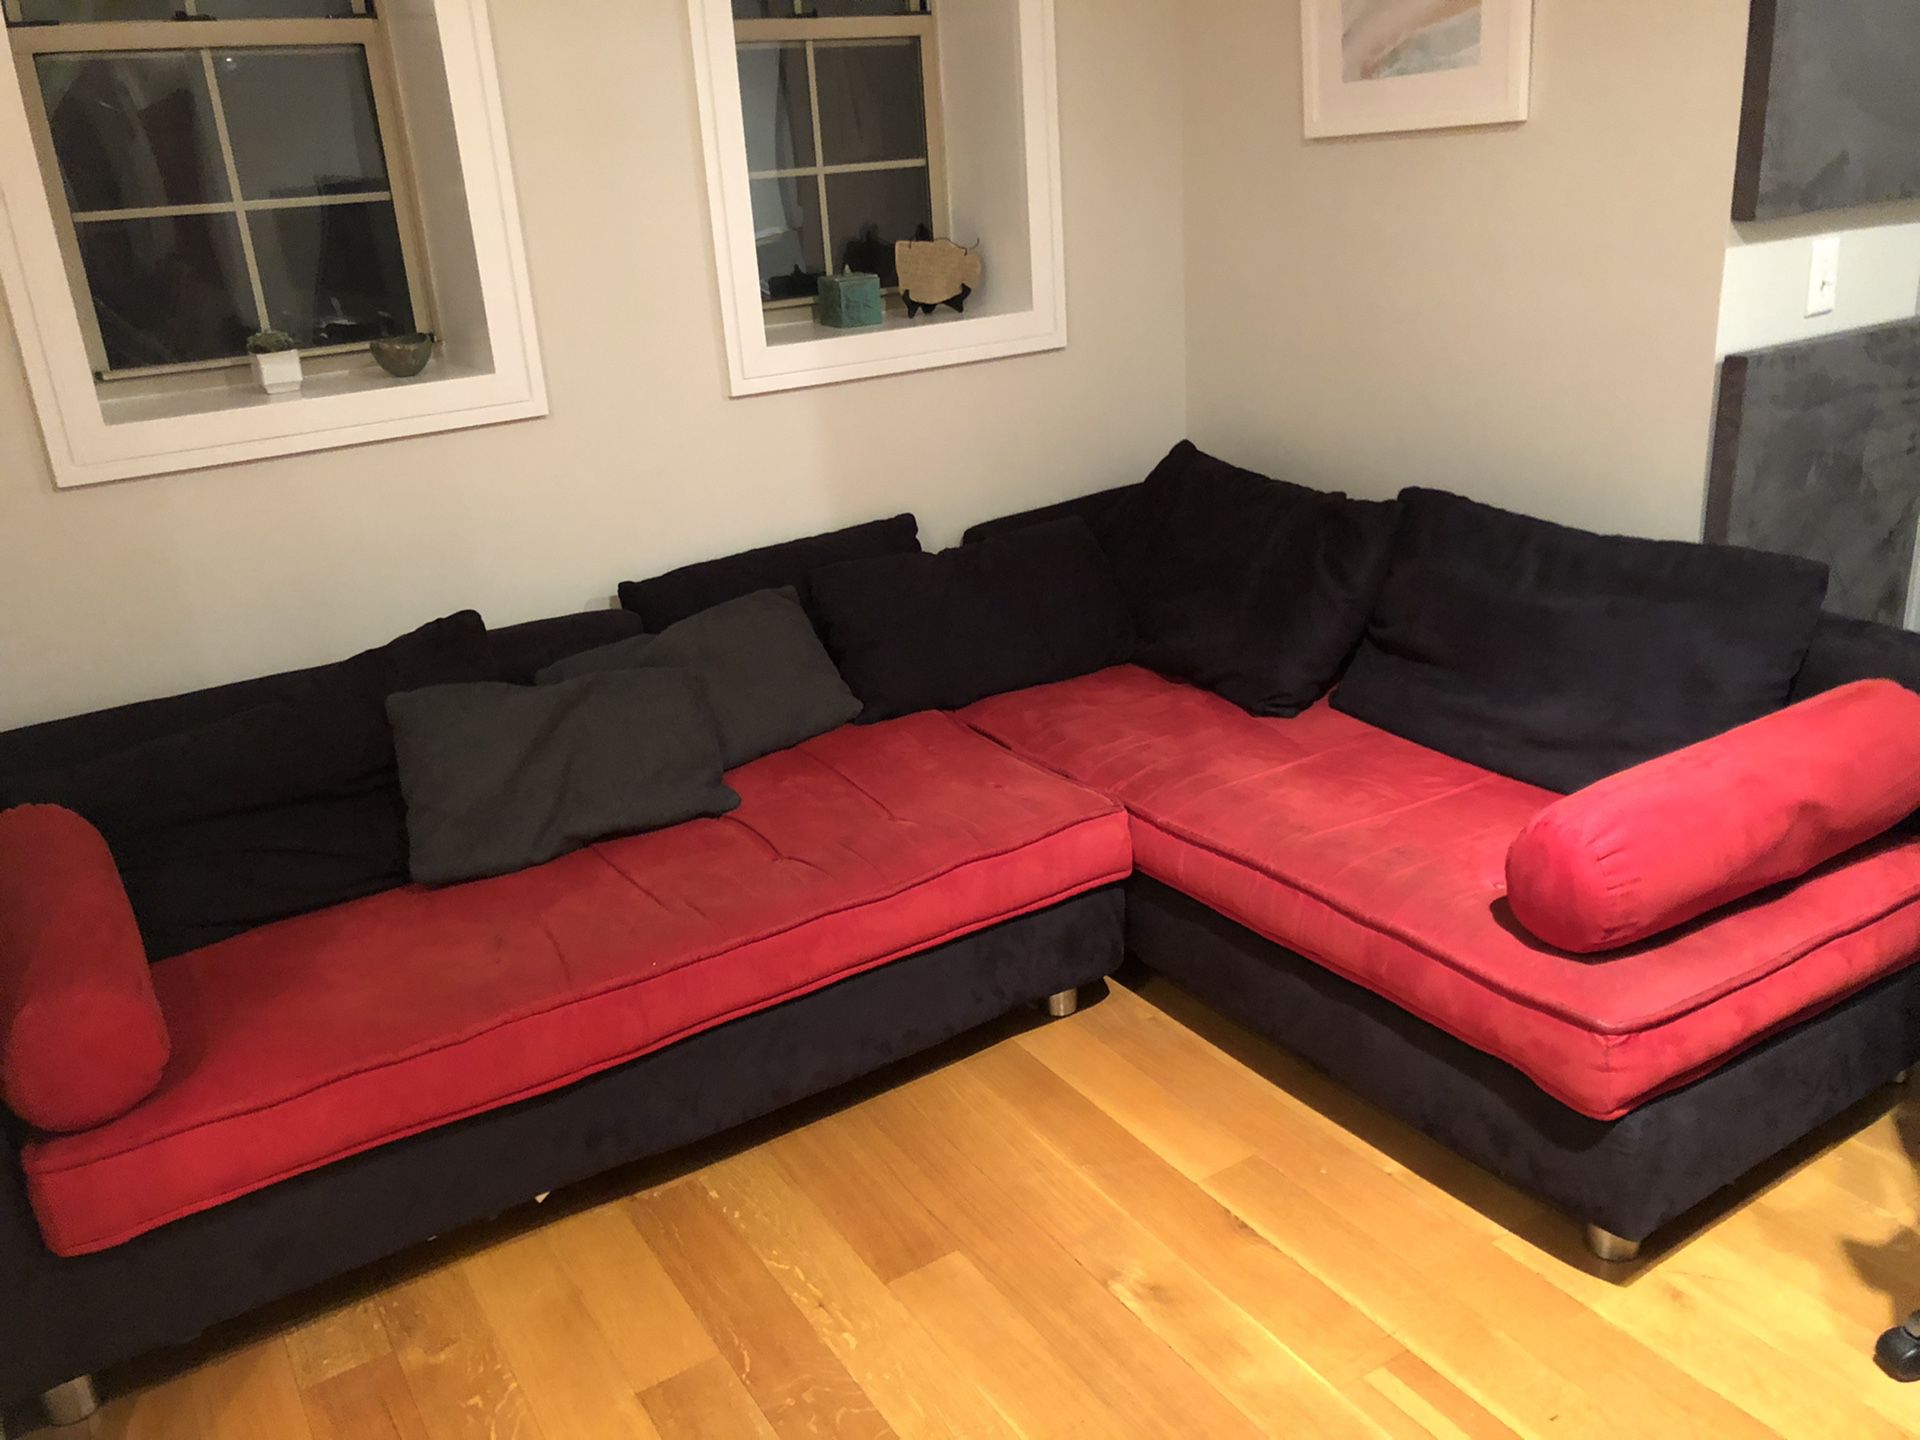 Red/Black Couch — Super Comfy (w/ pillows)